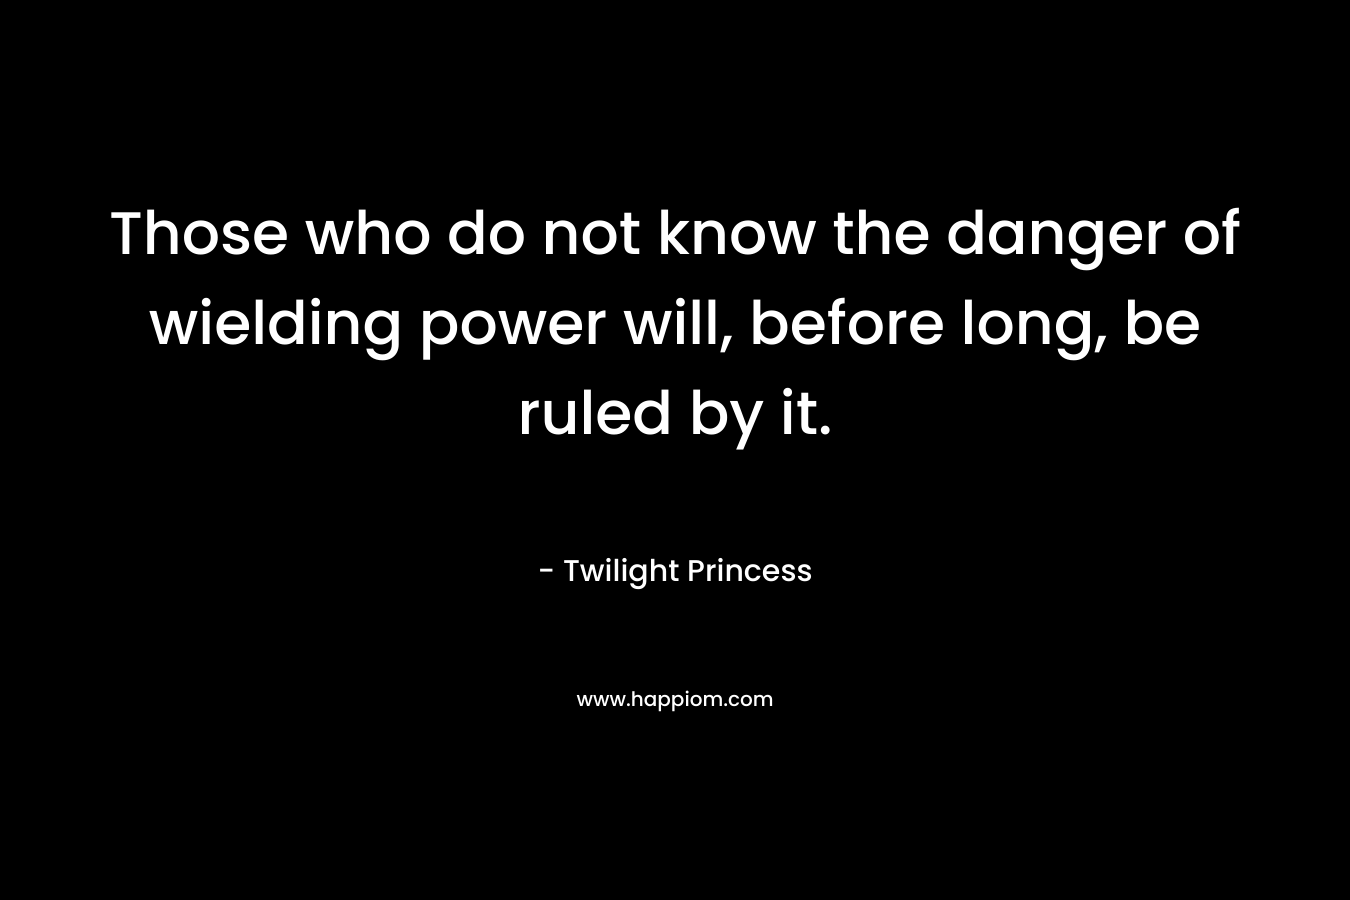 Those who do not know the danger of wielding power will, before long, be ruled by it.